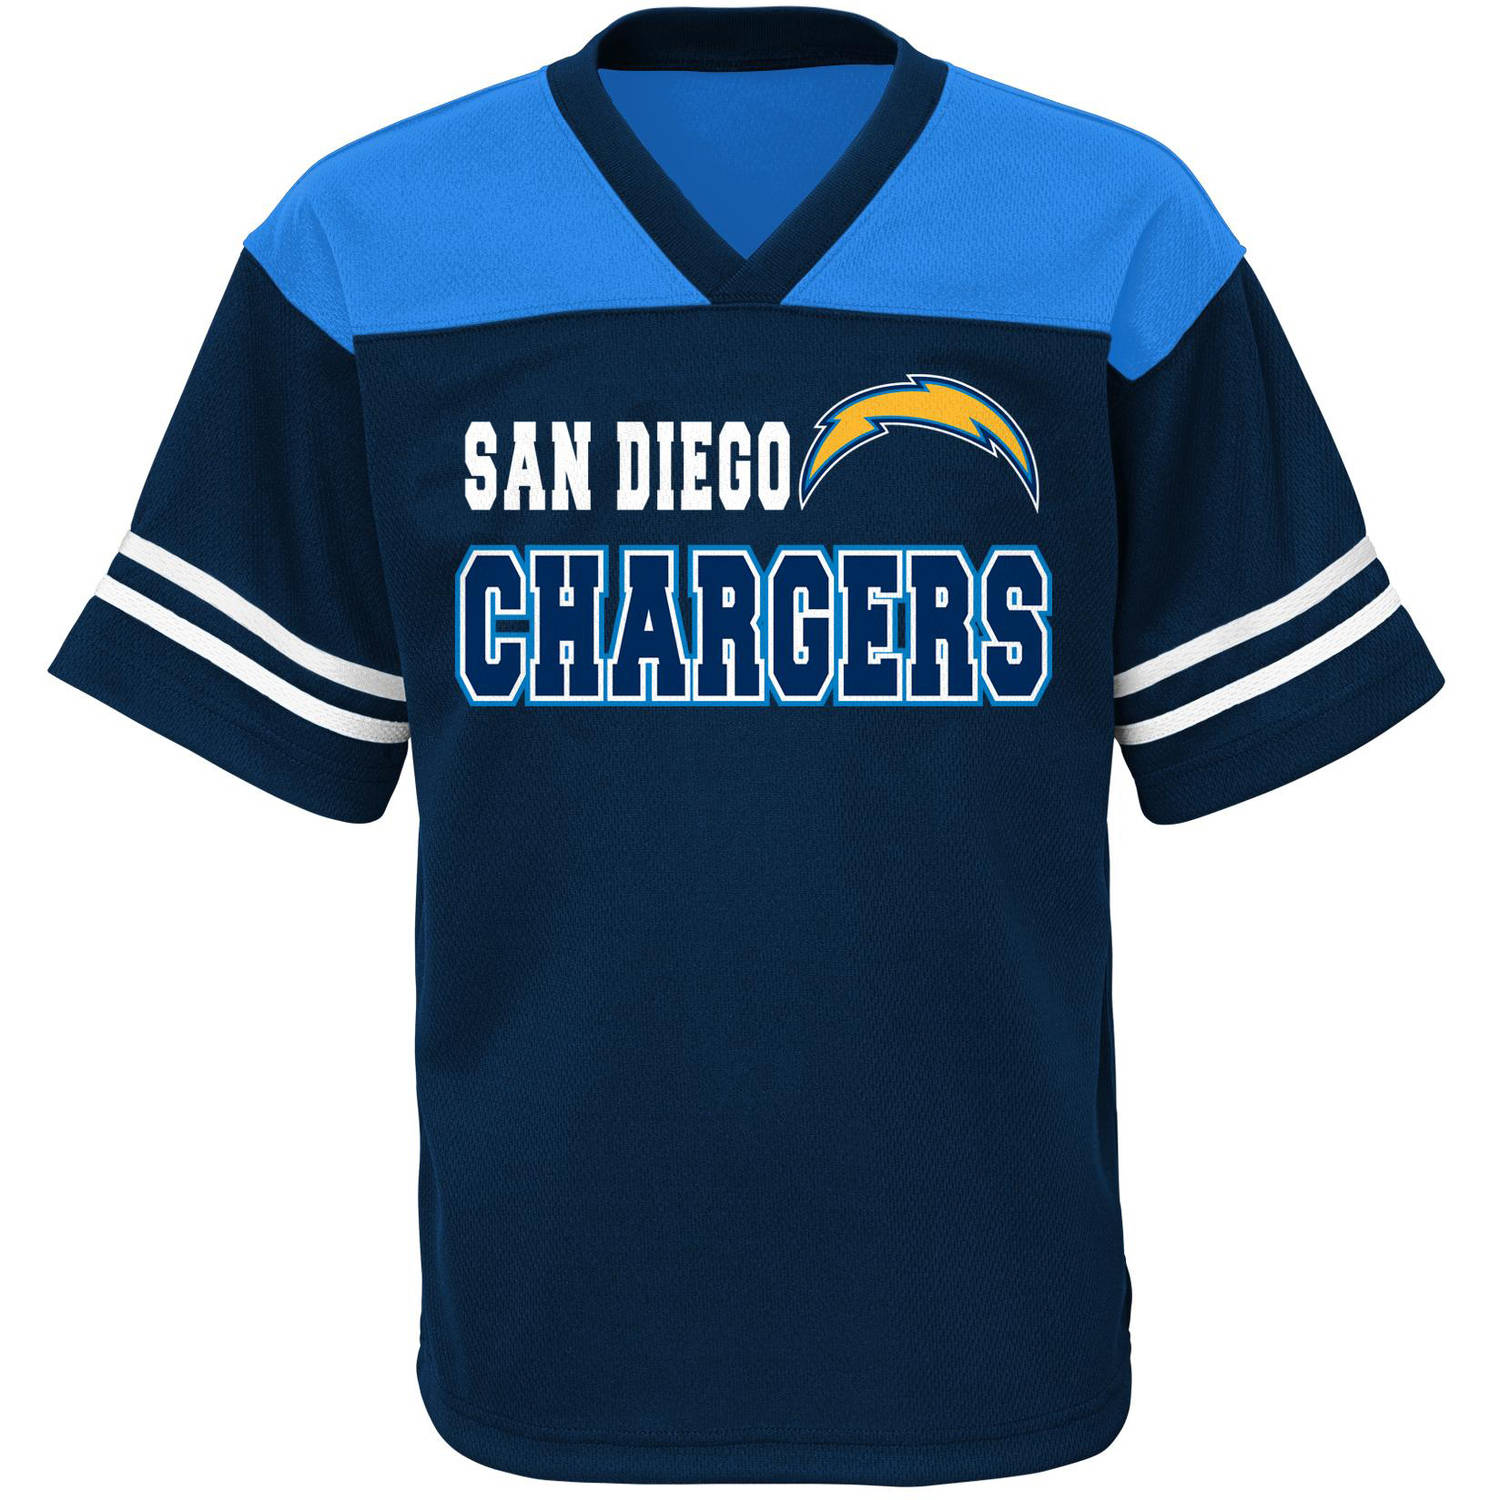 NFL Boys' San Diego Chargers Short Sleeve Mesh Team Top - image 1 of 1